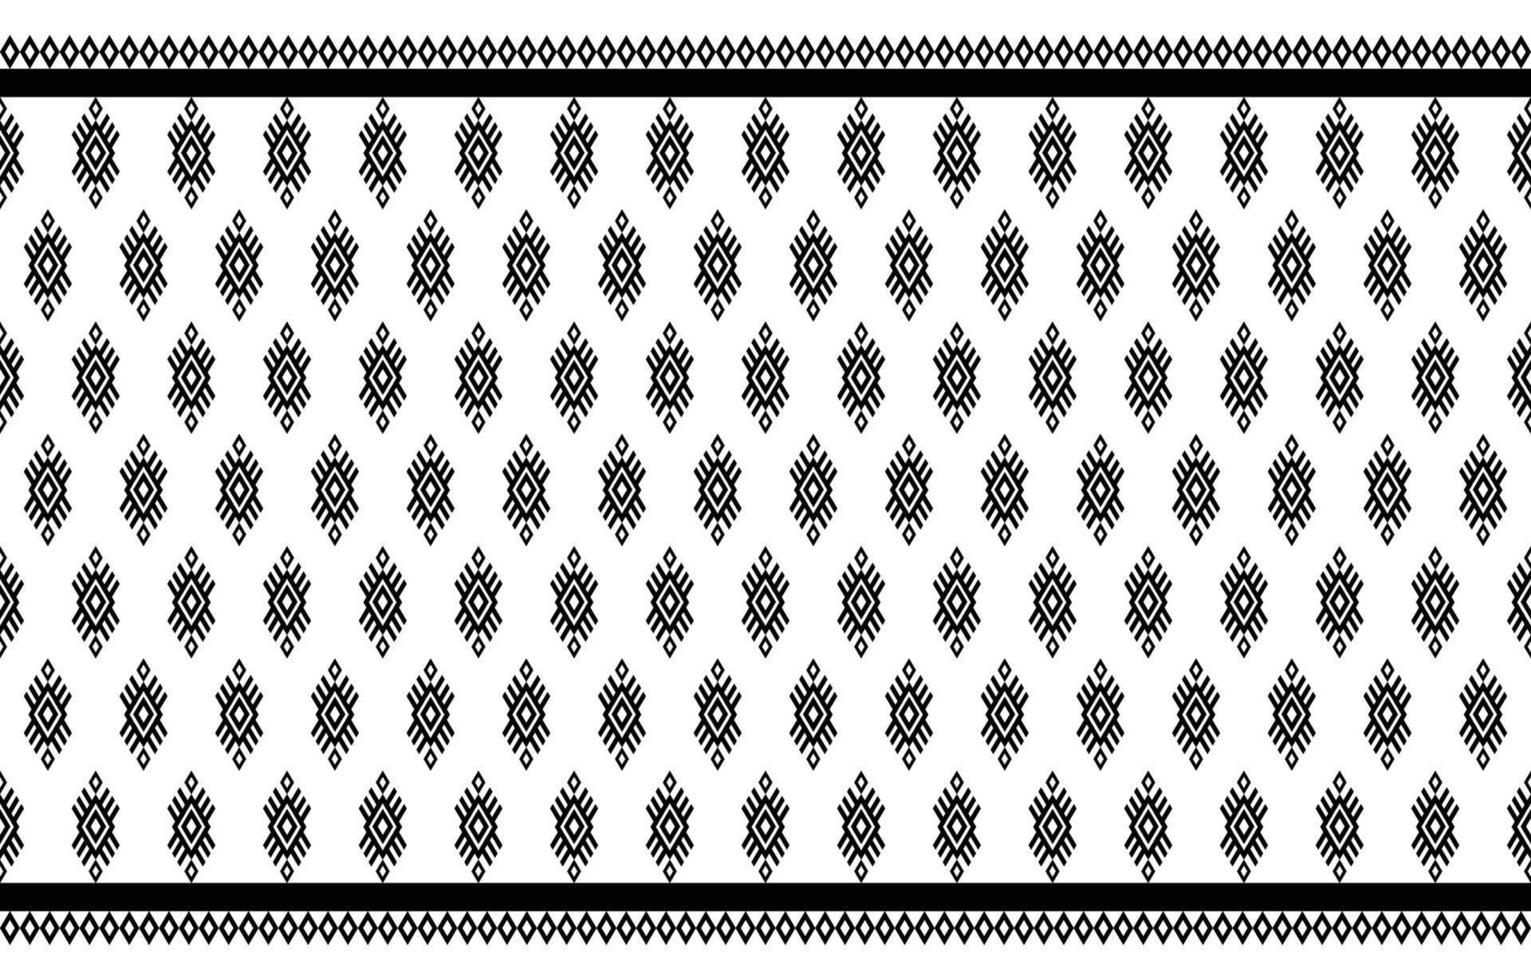 Geometric ethnic pattern seamless graphic. Style ethnic seamless colorful textile. Design for background,wallpaper,fabric,carpet,ornaments,decoration,clothing,Batik,wrapping,Vector illustration vector